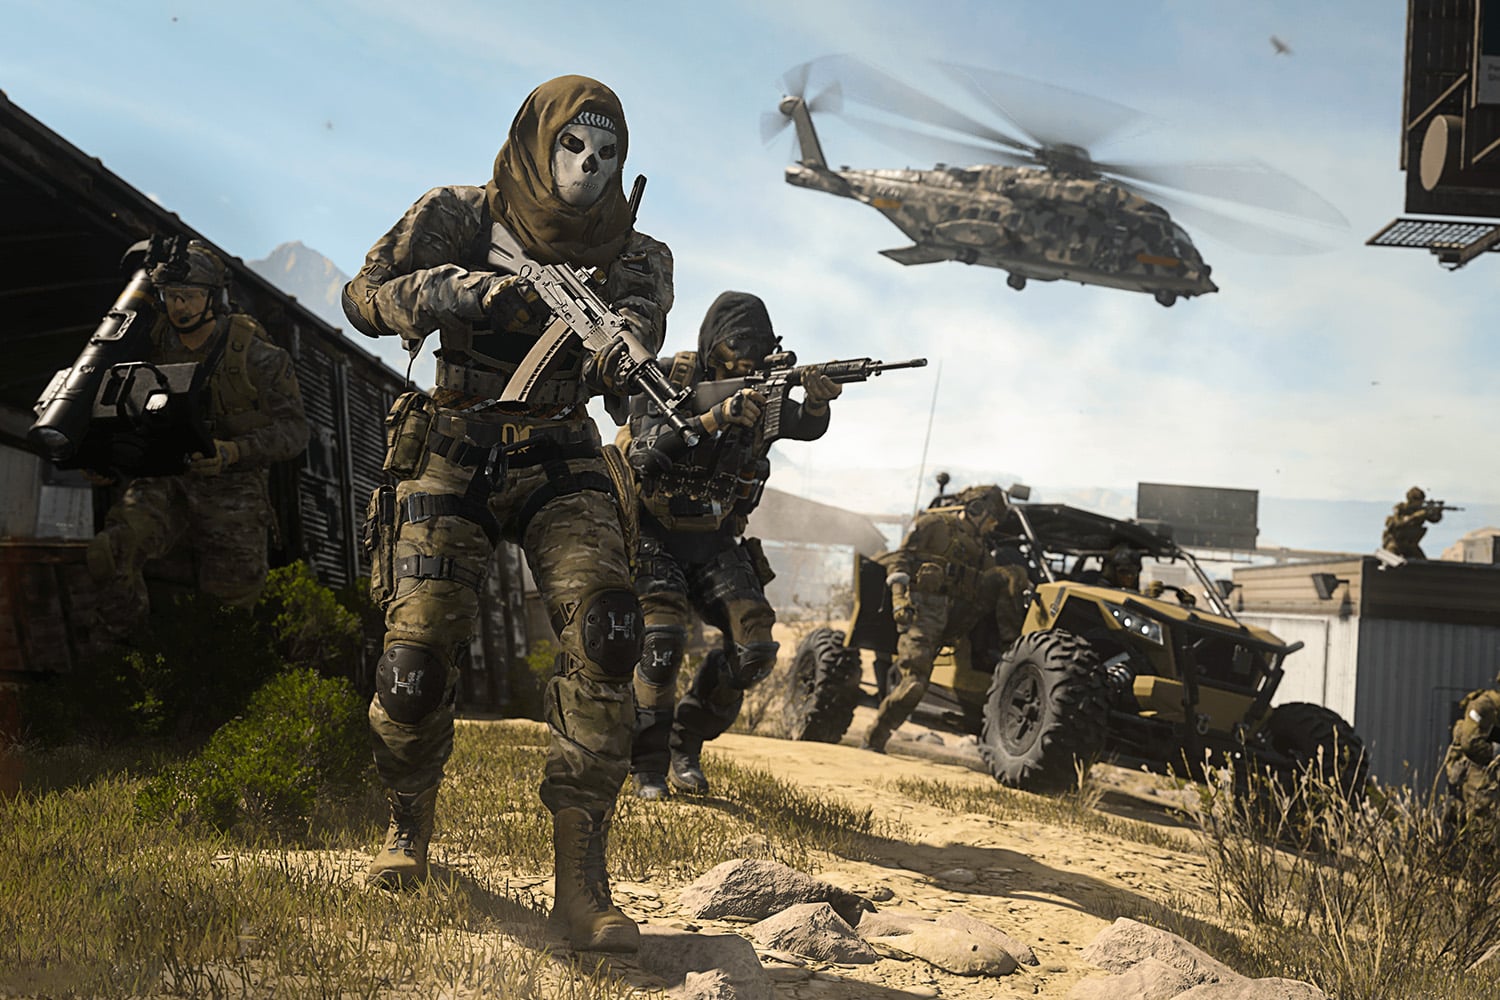 Still image from Call of Duty game play